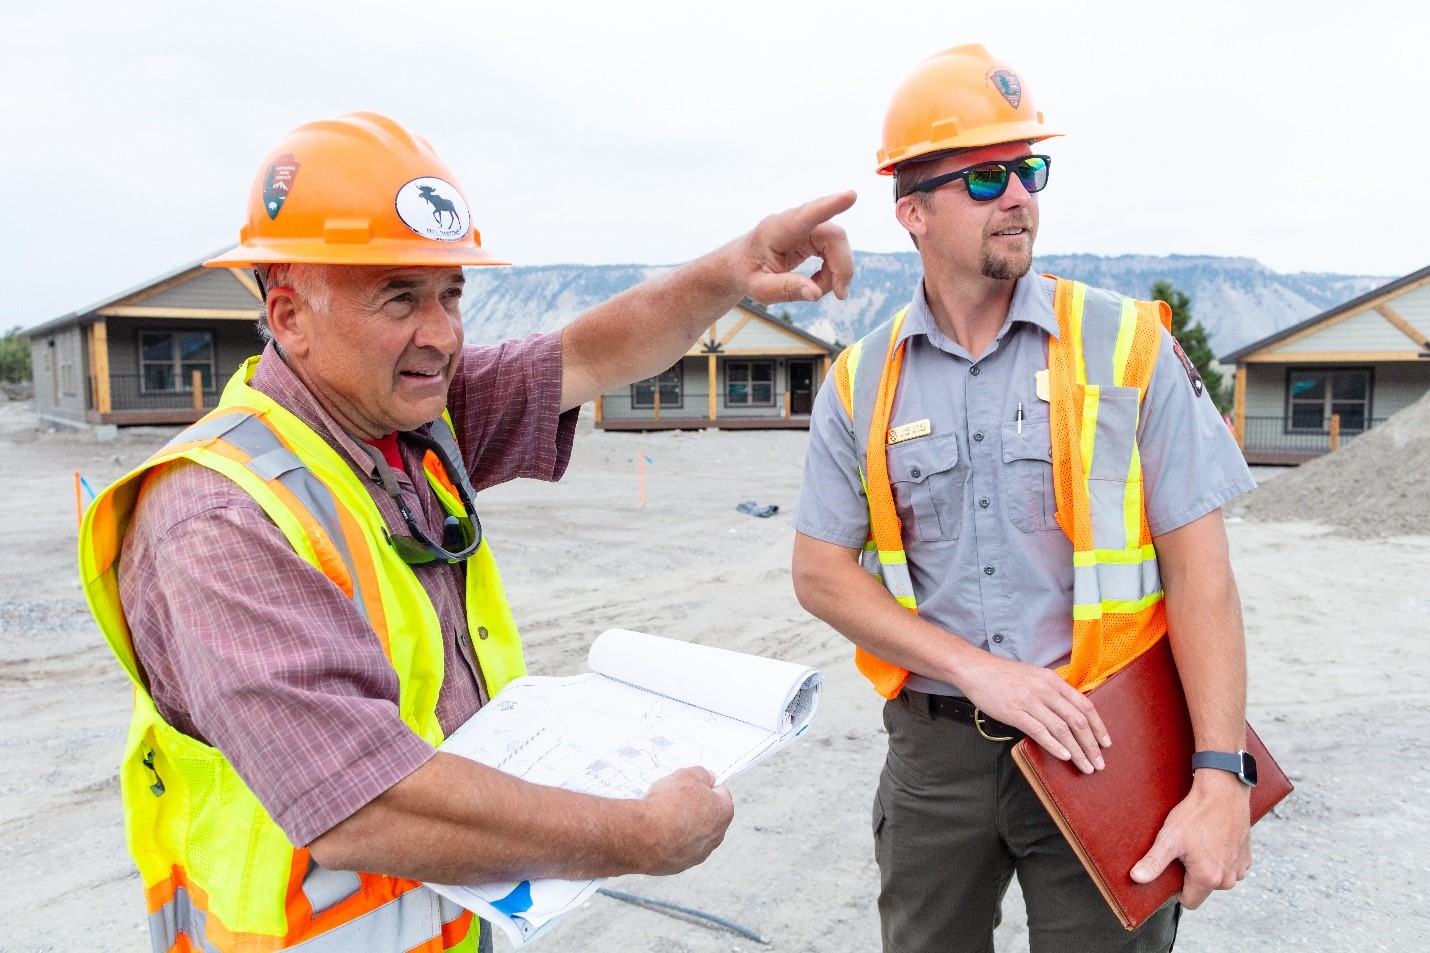 Two engineers with hard hats observe a building site.